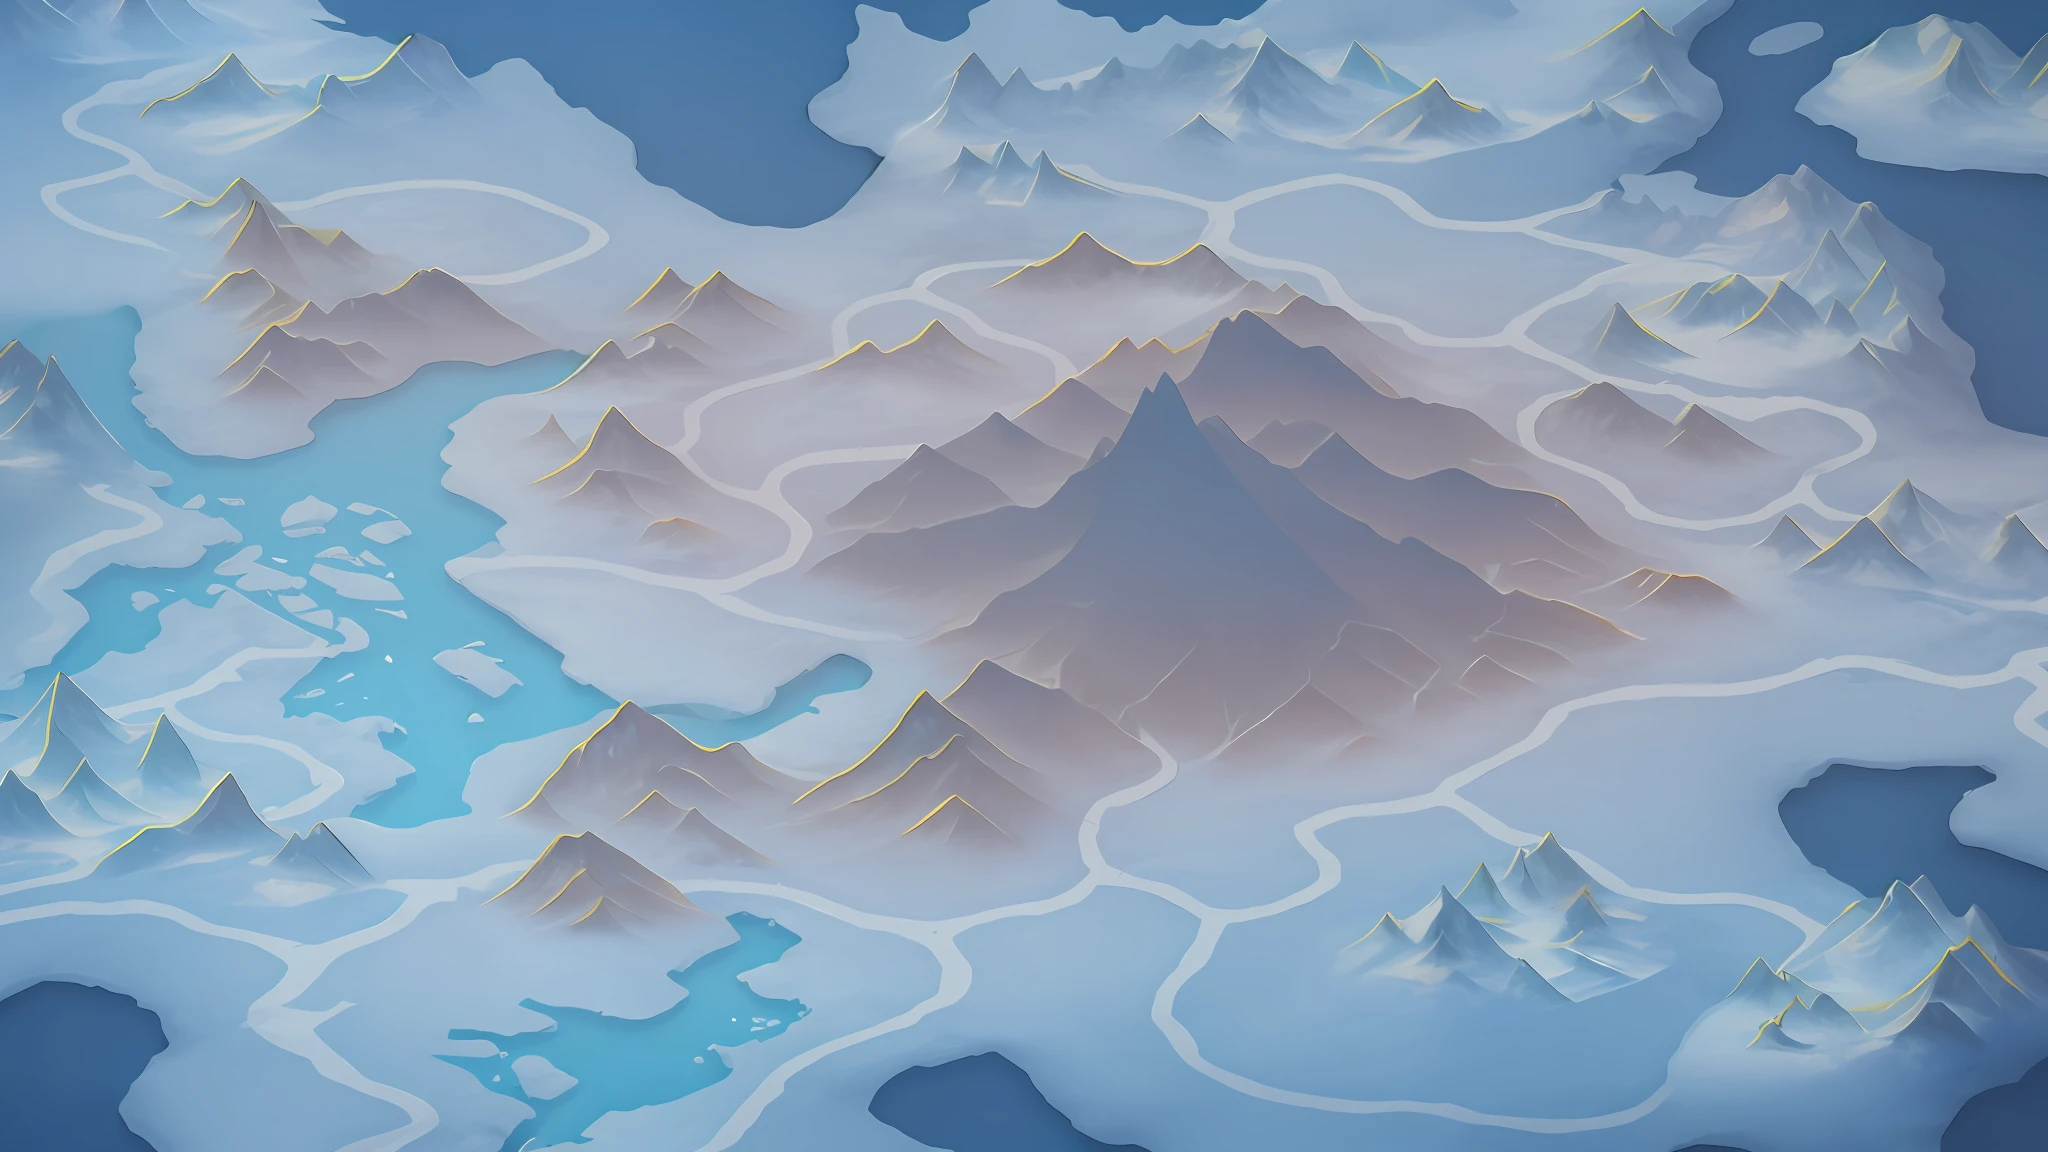 there is a large map of a mountain range with a lake, icey tundra background, icy mountains, an isometric fantasy map, ice mountains in the background, icy mountains in the background, mountainous background, game map matte painting, mountainscape, snowy mountains, seas of mountain, ice mountains afar, background mountains, detailed scenery —width 672